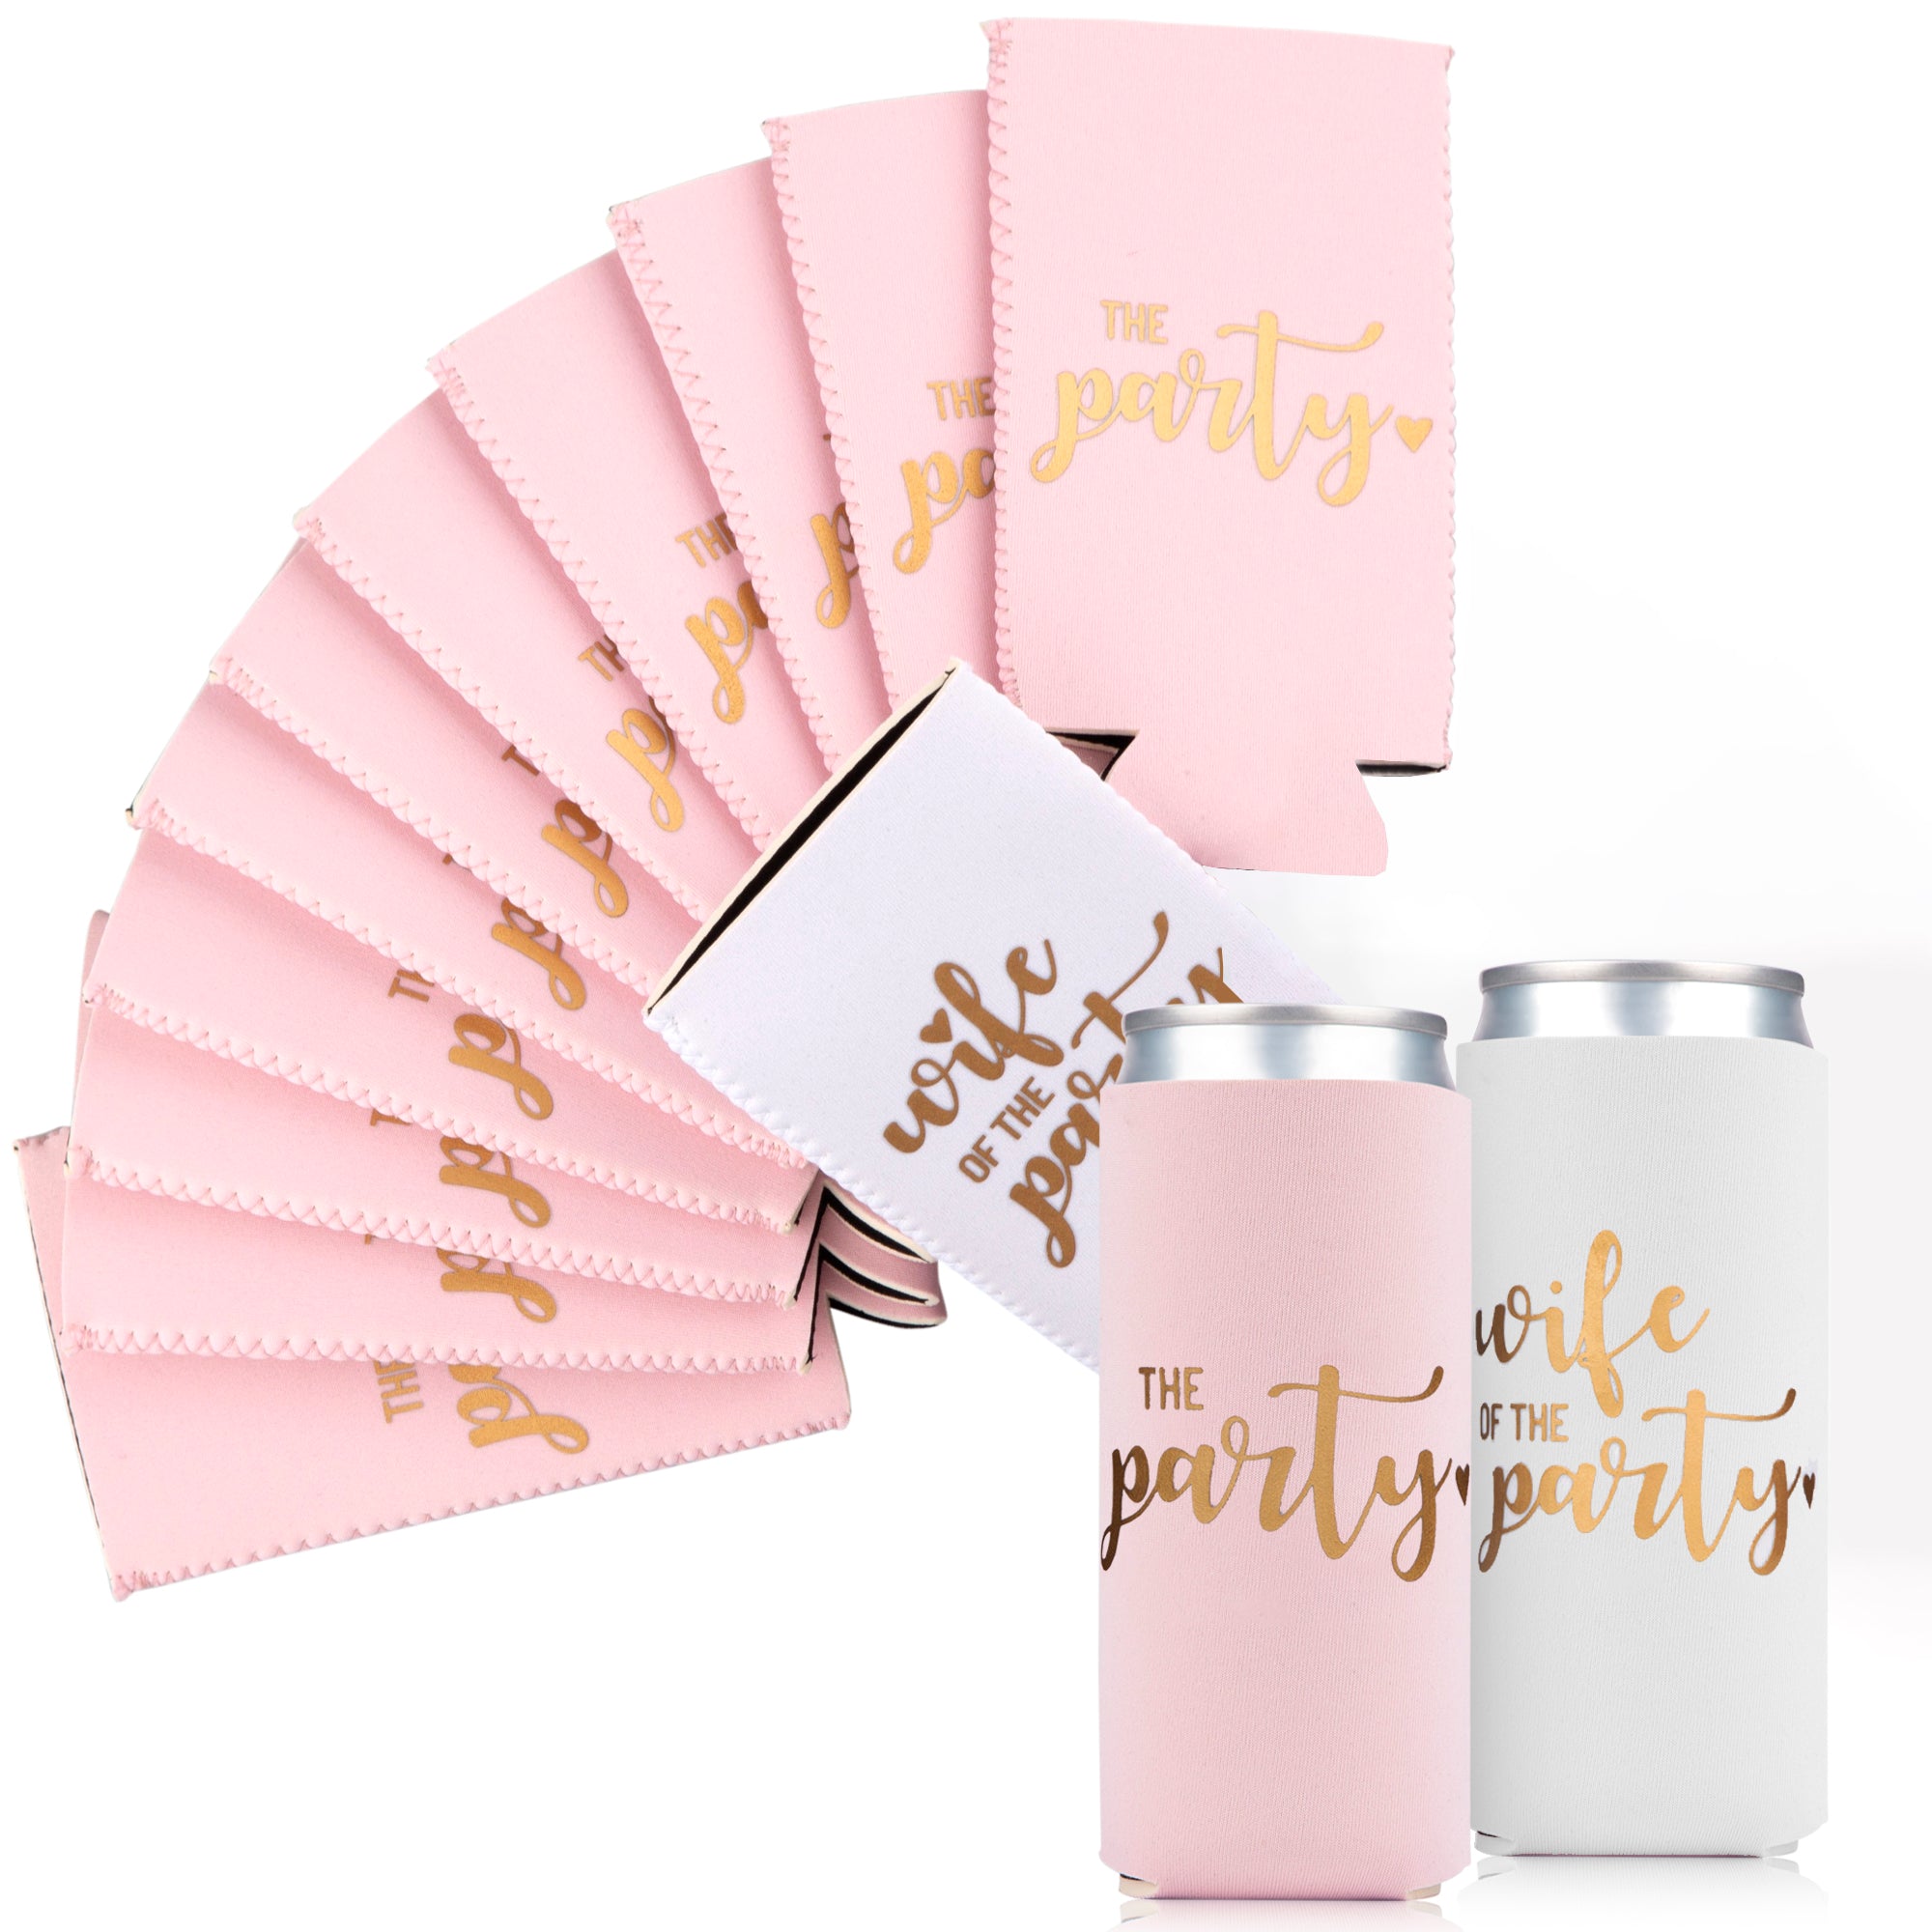  P.LOTOR Bachelorette Party Favors Slim Can Cooler Neoprene [ 12  Pack ], Bridal Shower Slim Can Holder, Bride Tribe Bachelorette Party  Naughty, Beer Cans Insulators Skinny Coolie Compatible : Home & Kitchen